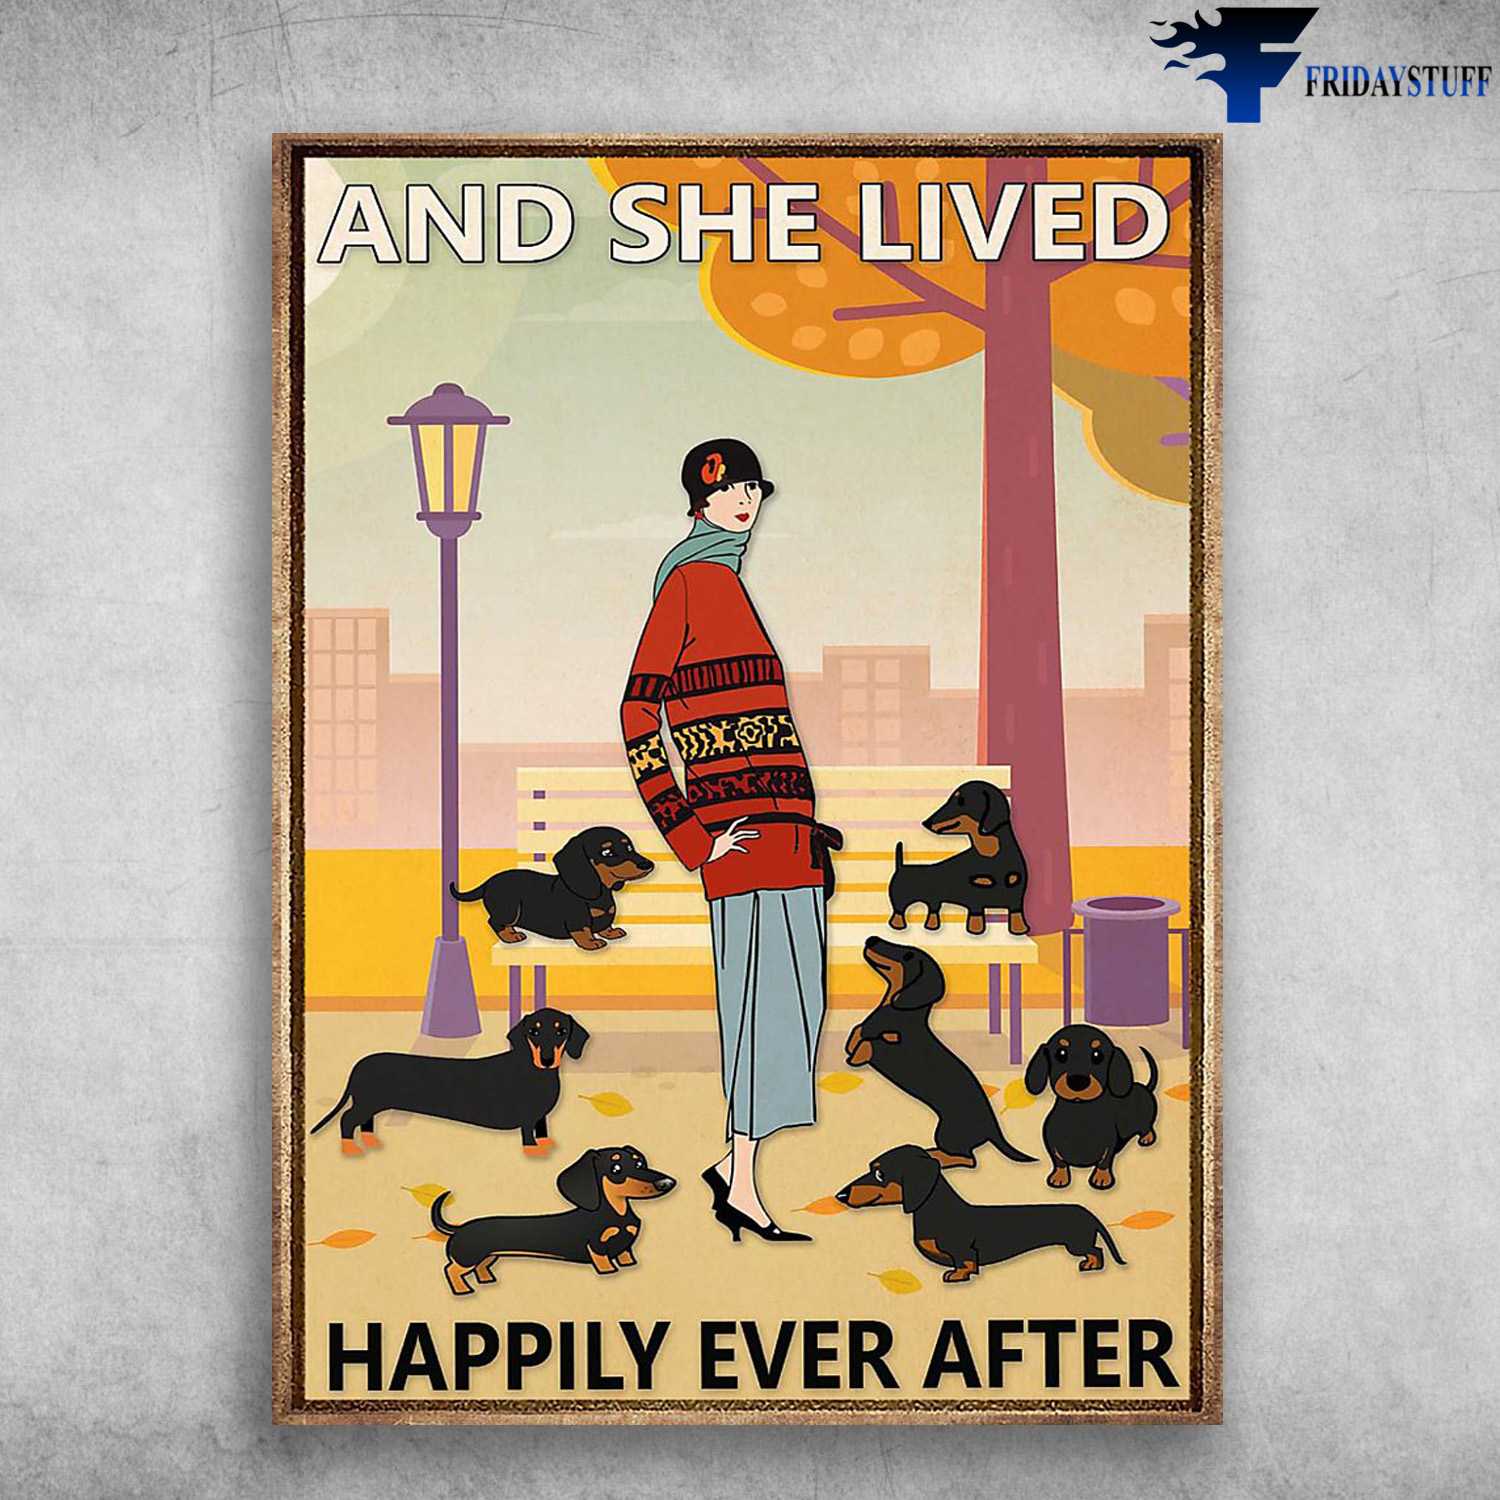 Dog Lover, Dachshund Dog, And She Lived, Happily Ever After